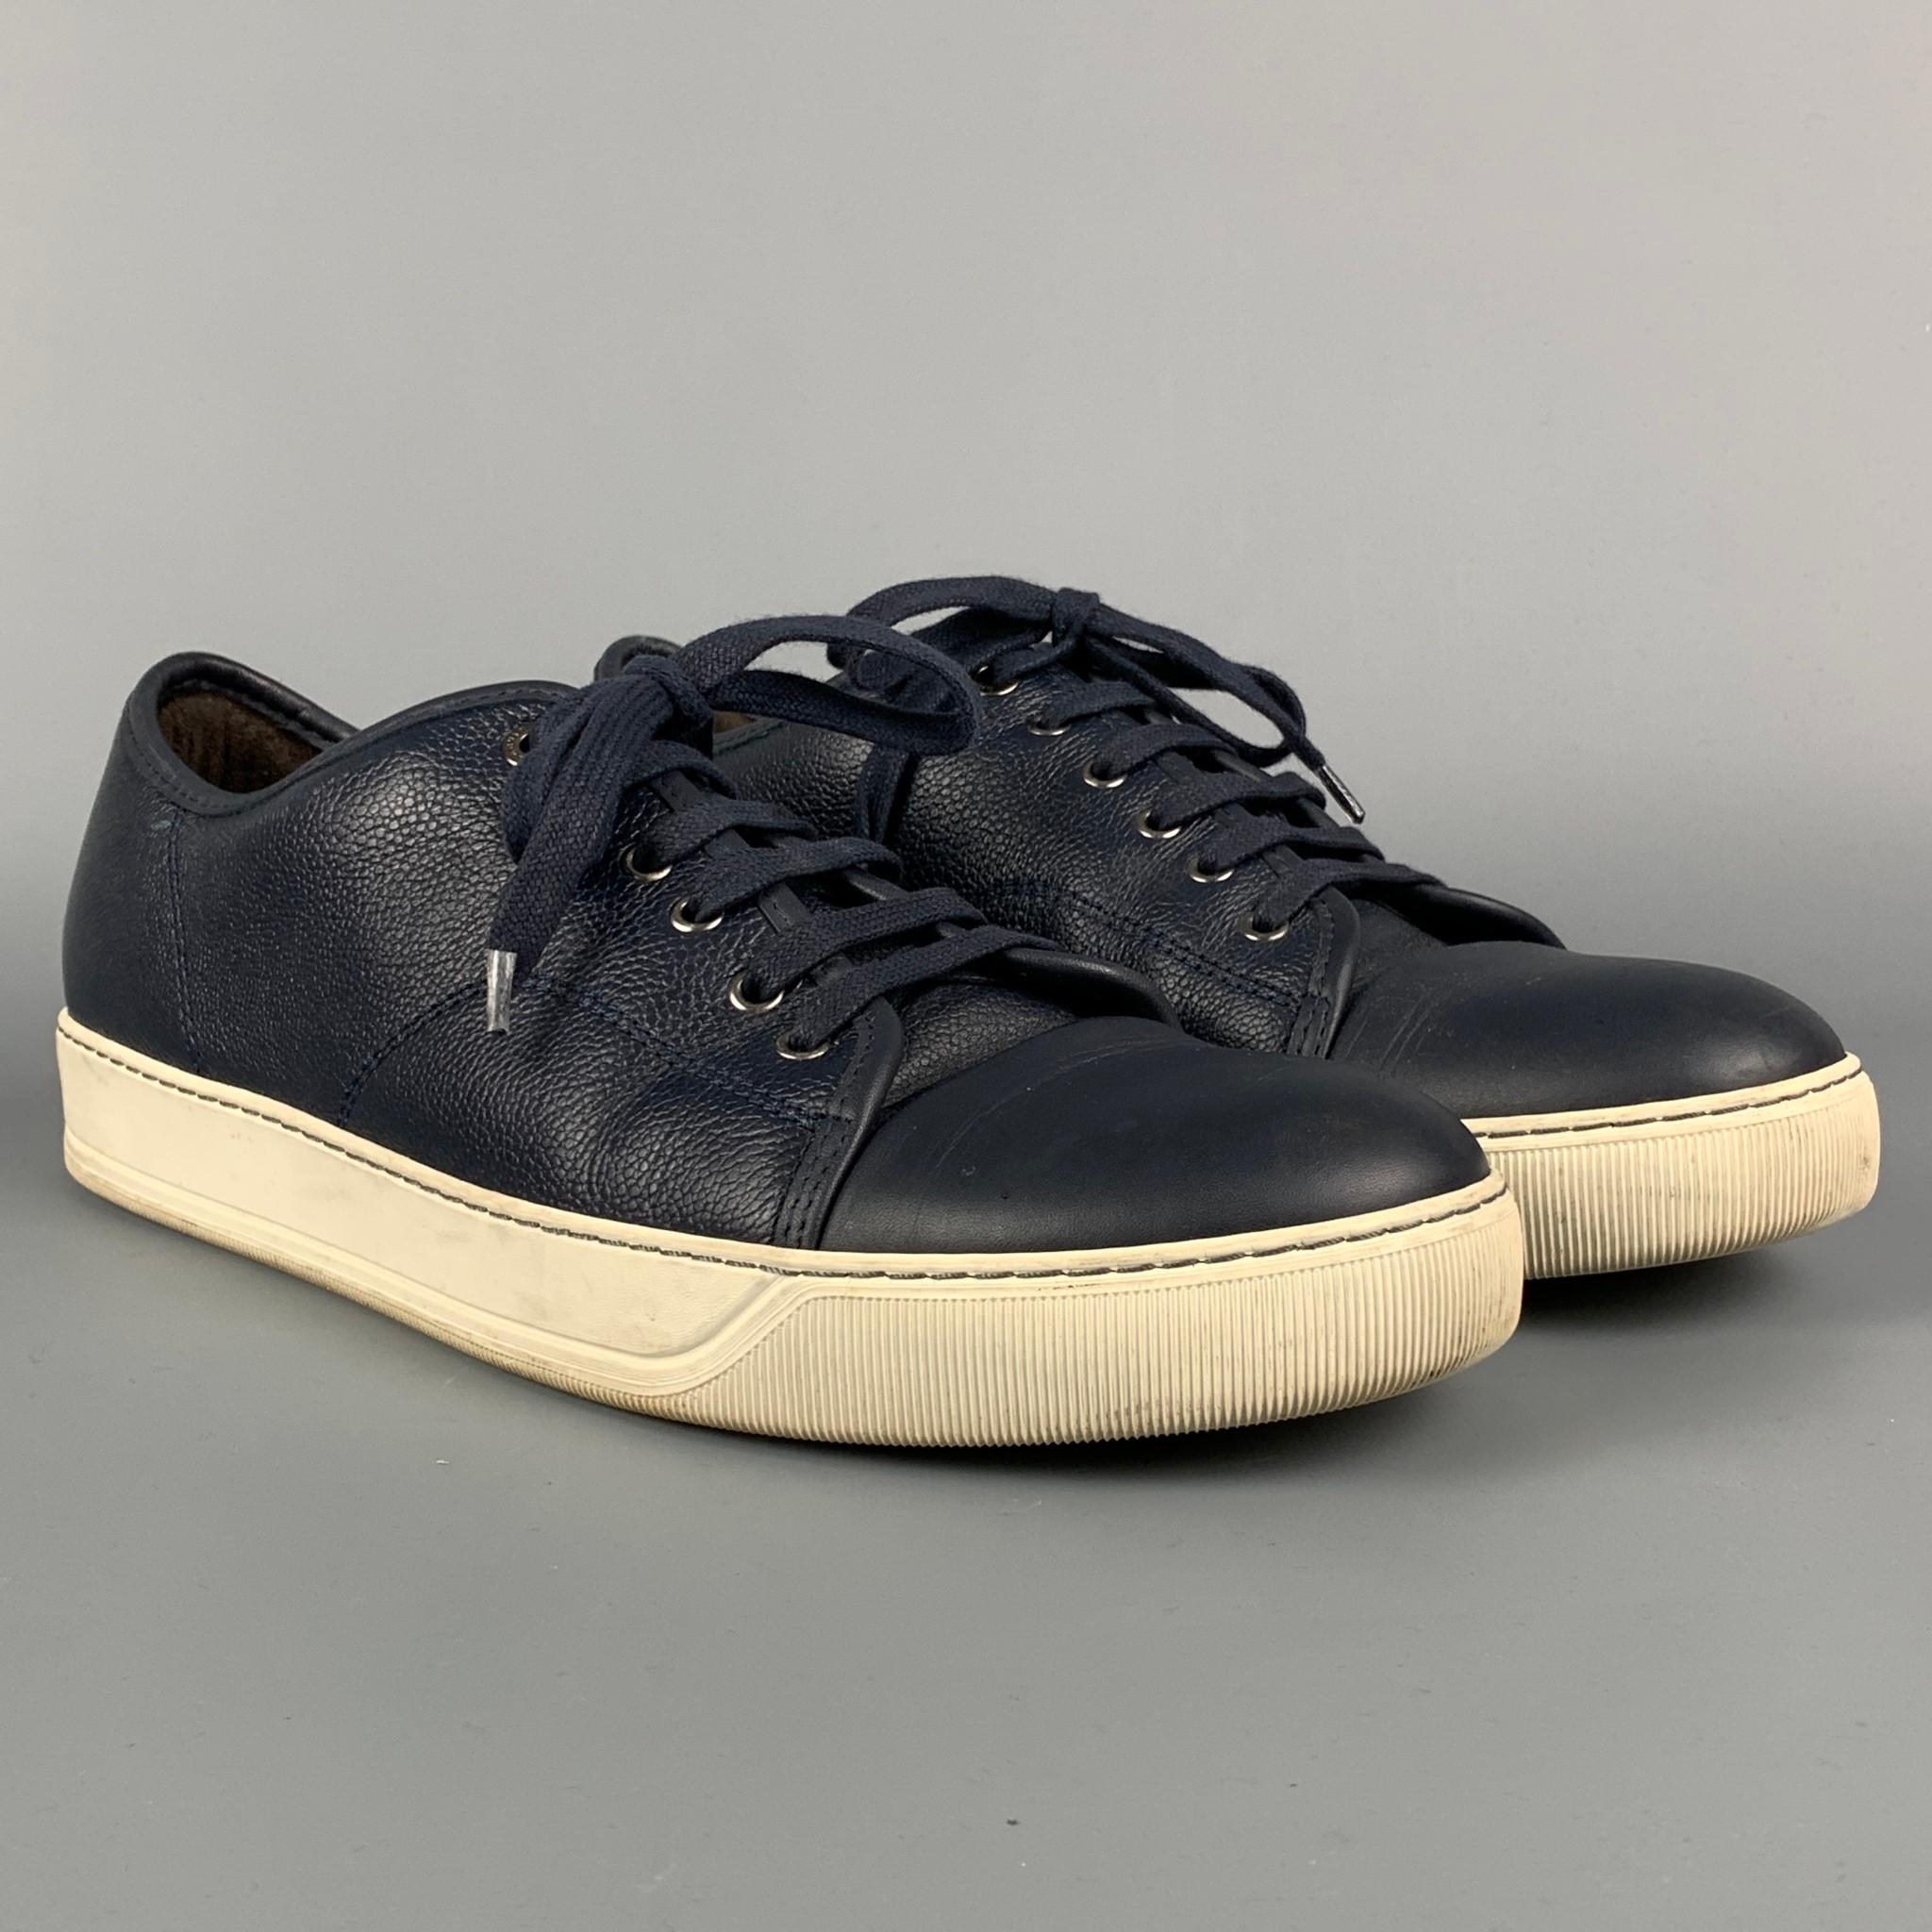 LANVIN sneakers comes in a navy leather featuring a cap toe, white rubber sole, and a lace up closure. Made in Portugal. 

Good Pre-Owned Condition.
Marked: 10

Outsole: 12 in. x 4.25 in. 